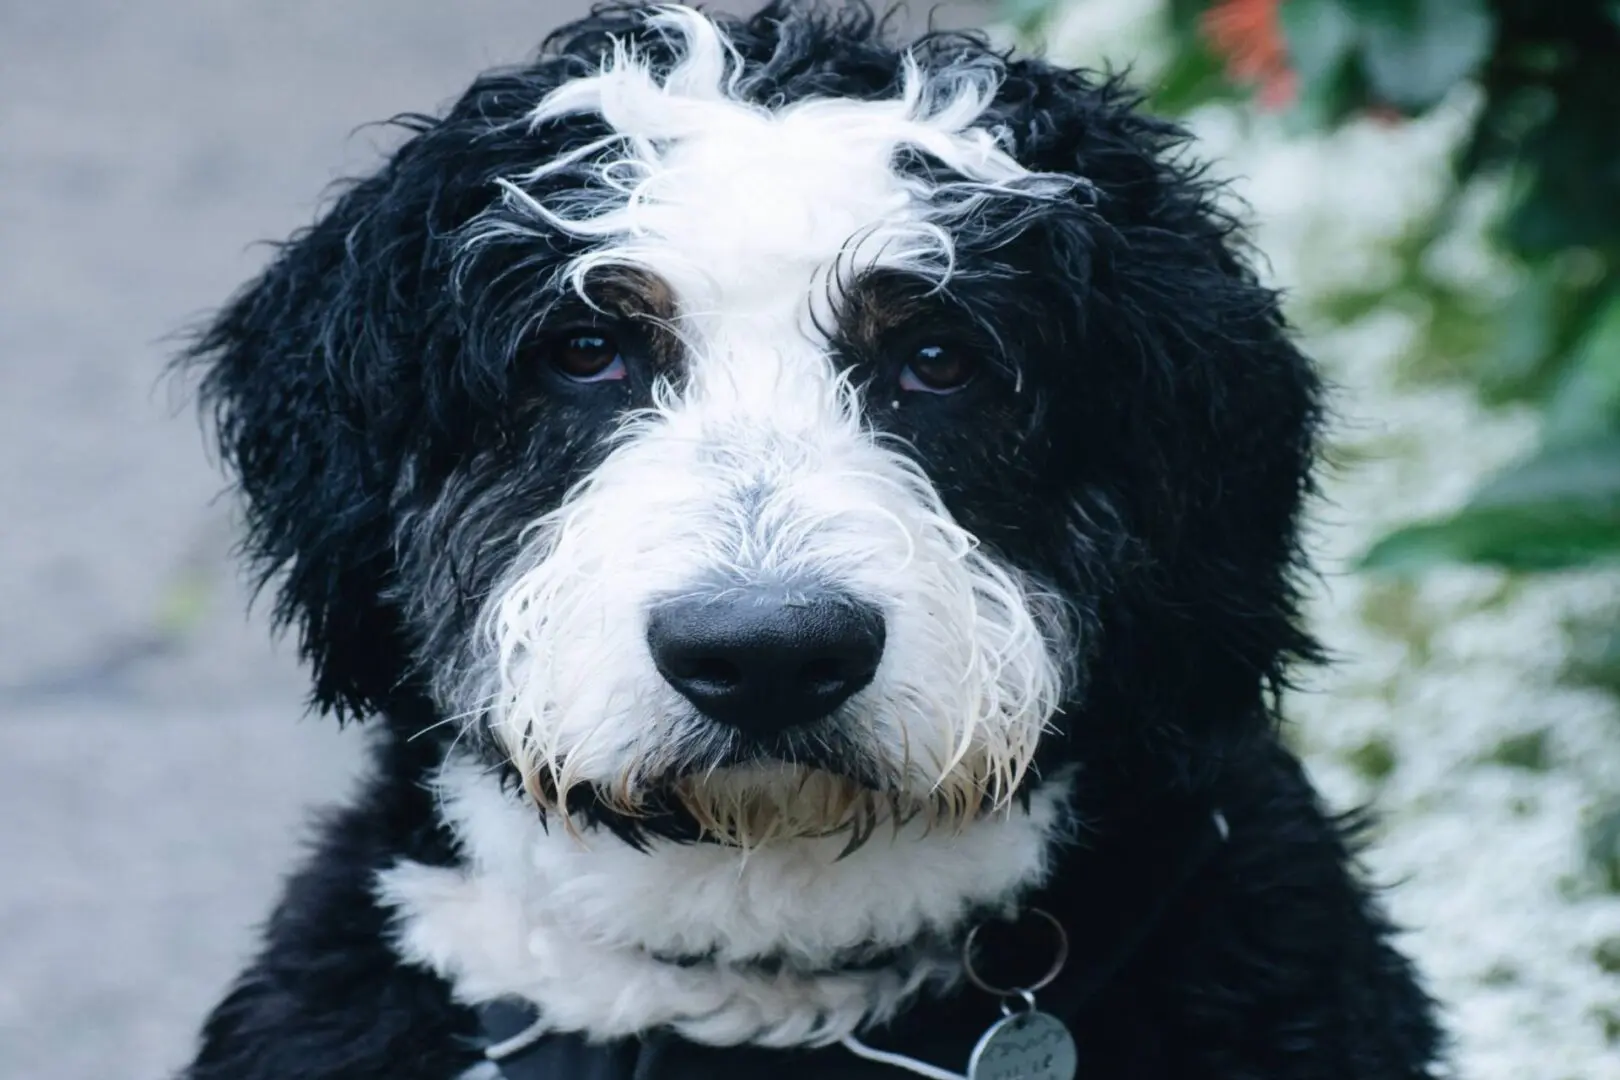 A black and white dog with a tag on its neck.